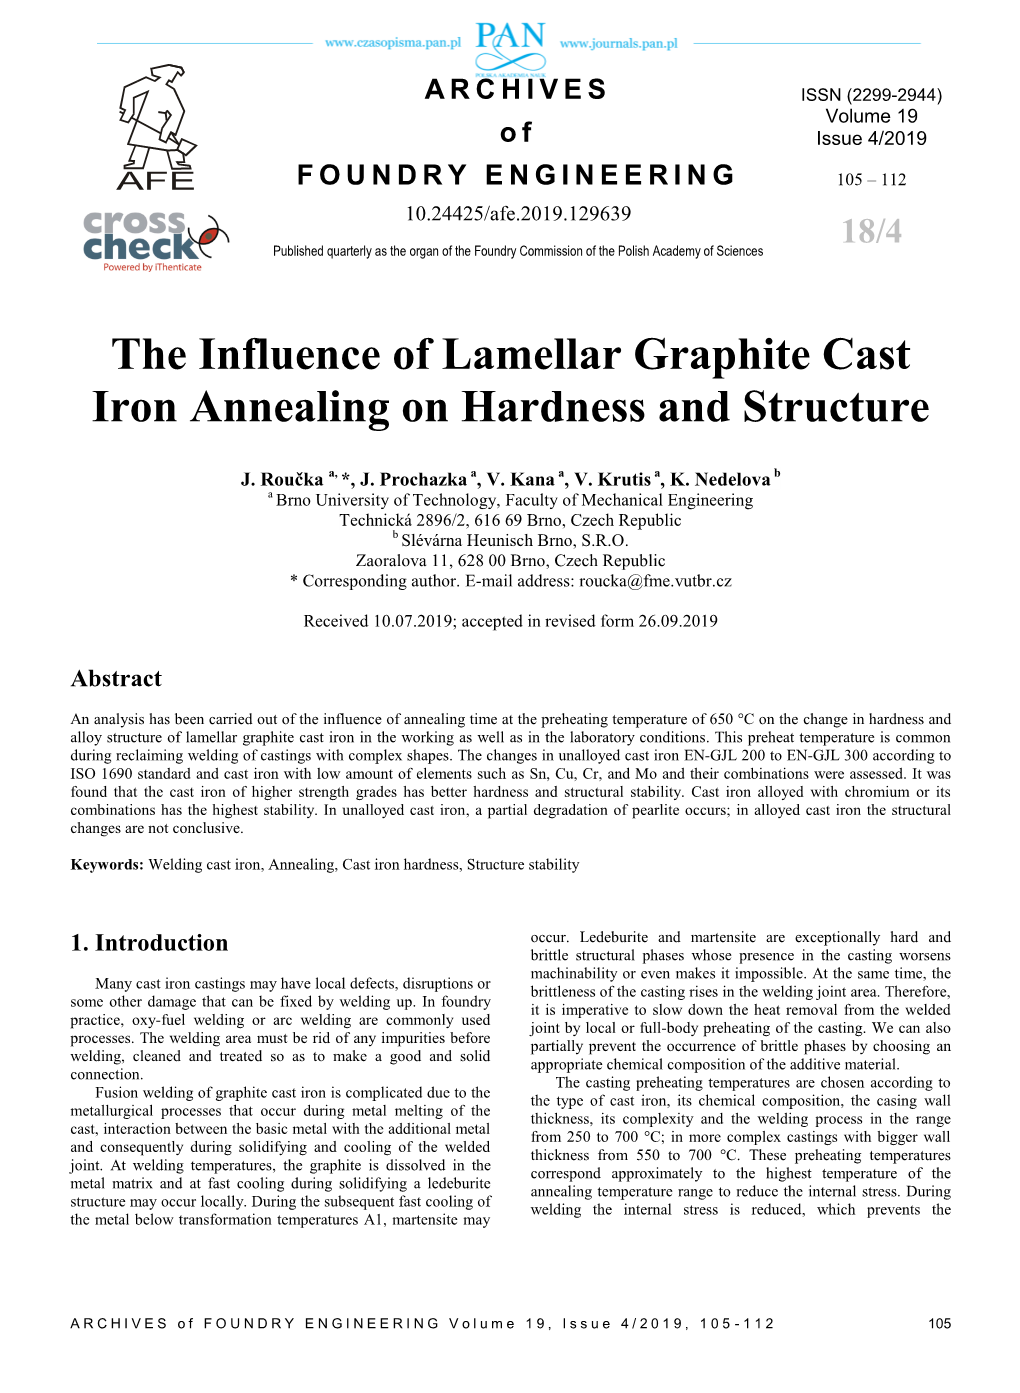 The Influence of Lamellar Graphite Cast Iron Annealing on Hardness and Structure